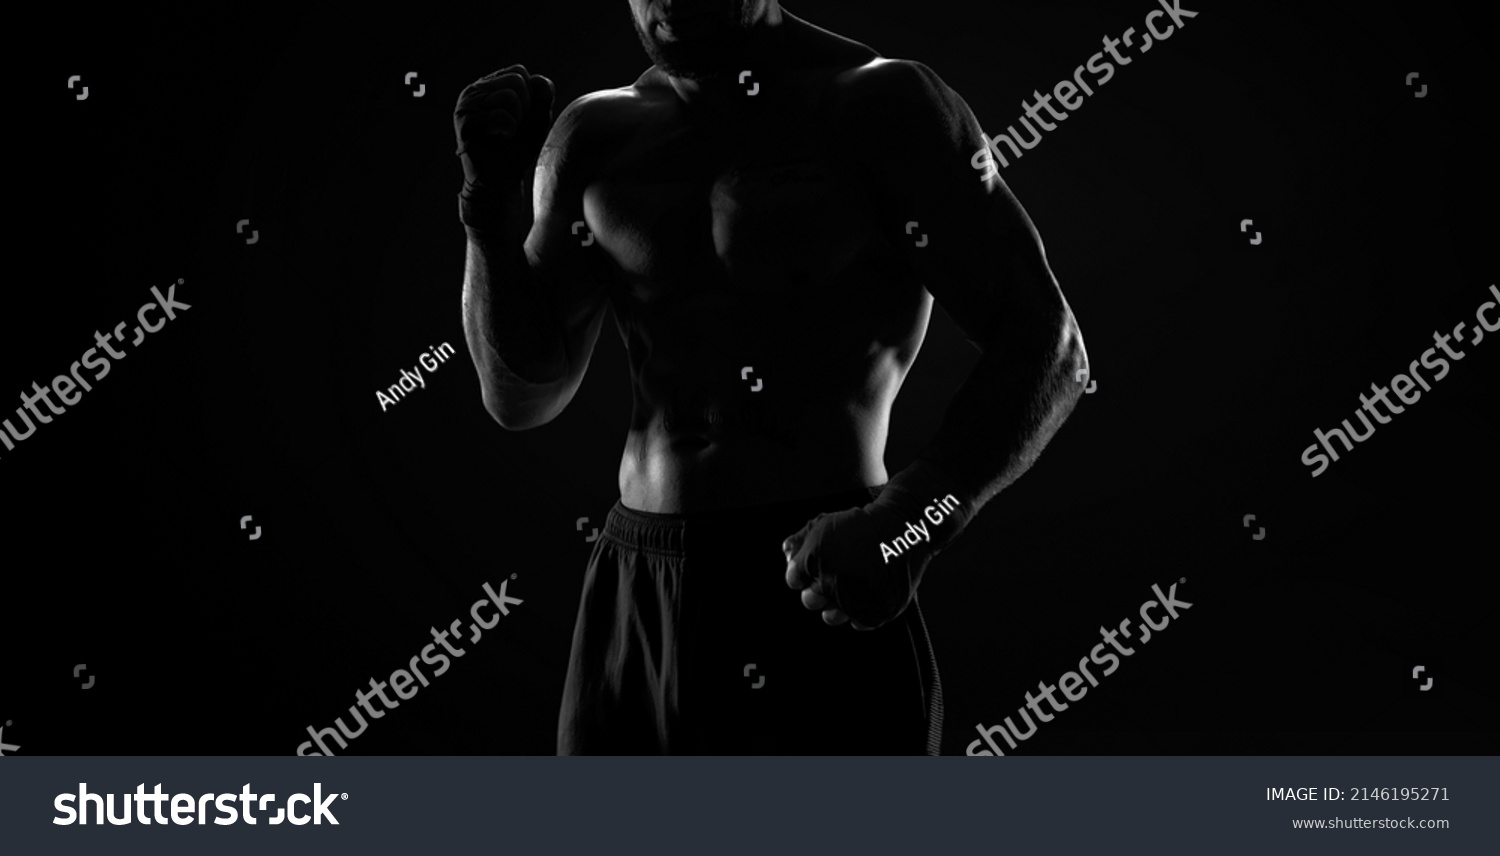 Noname image of a kickboxer on a dark background. The concept of mixed martial arts. MMA #2146195271